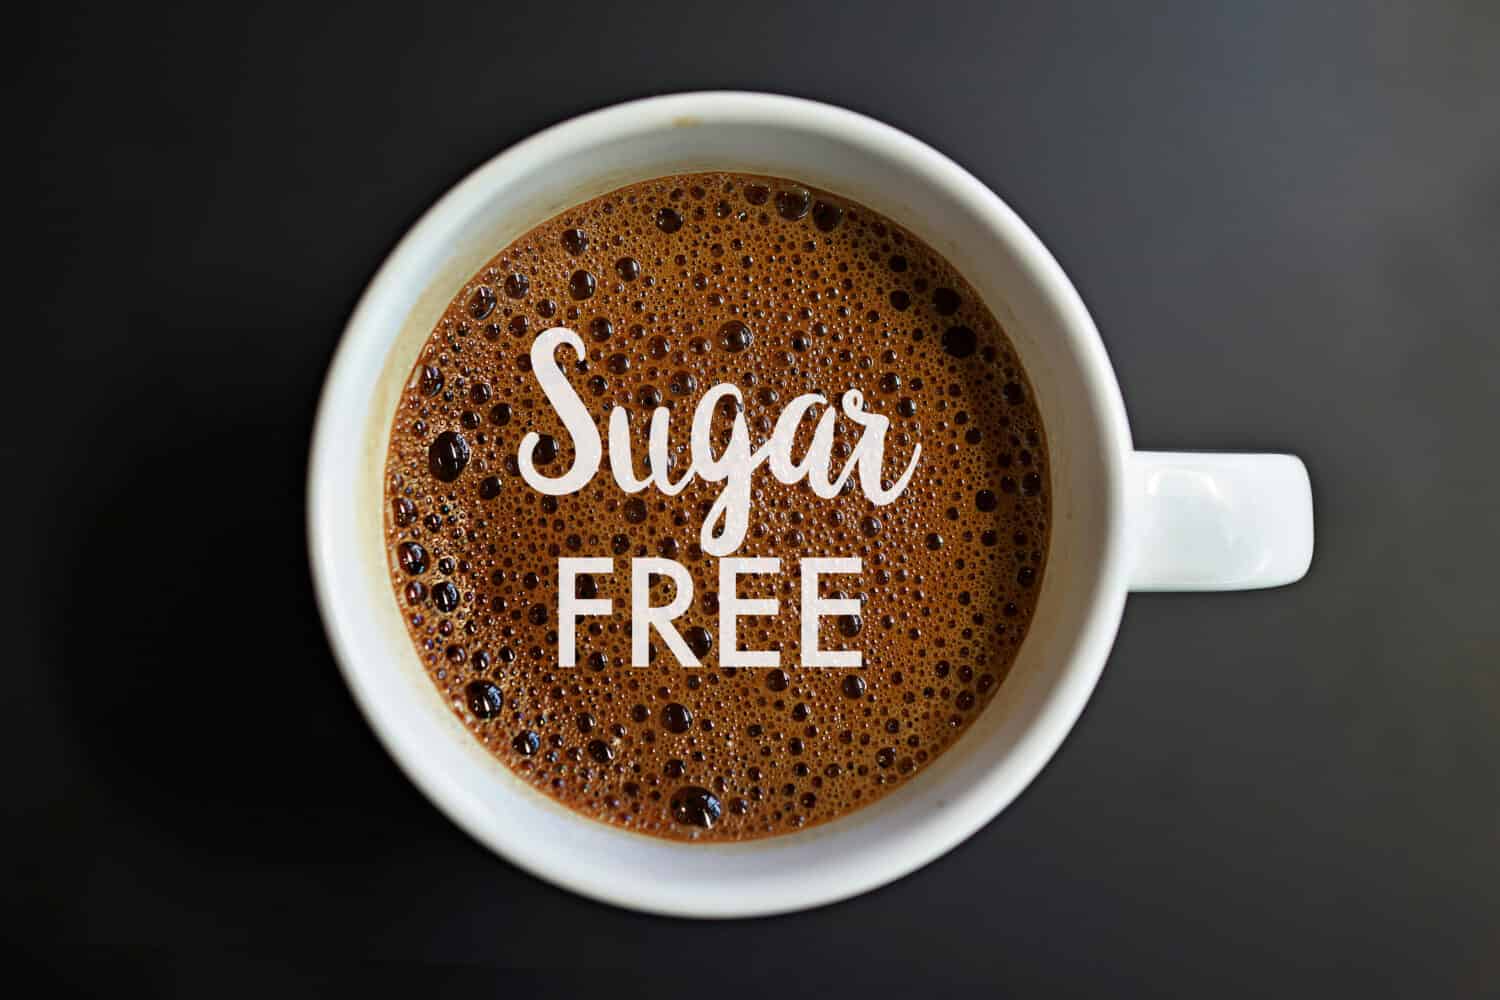 Sugar free word on Coffee cup concept